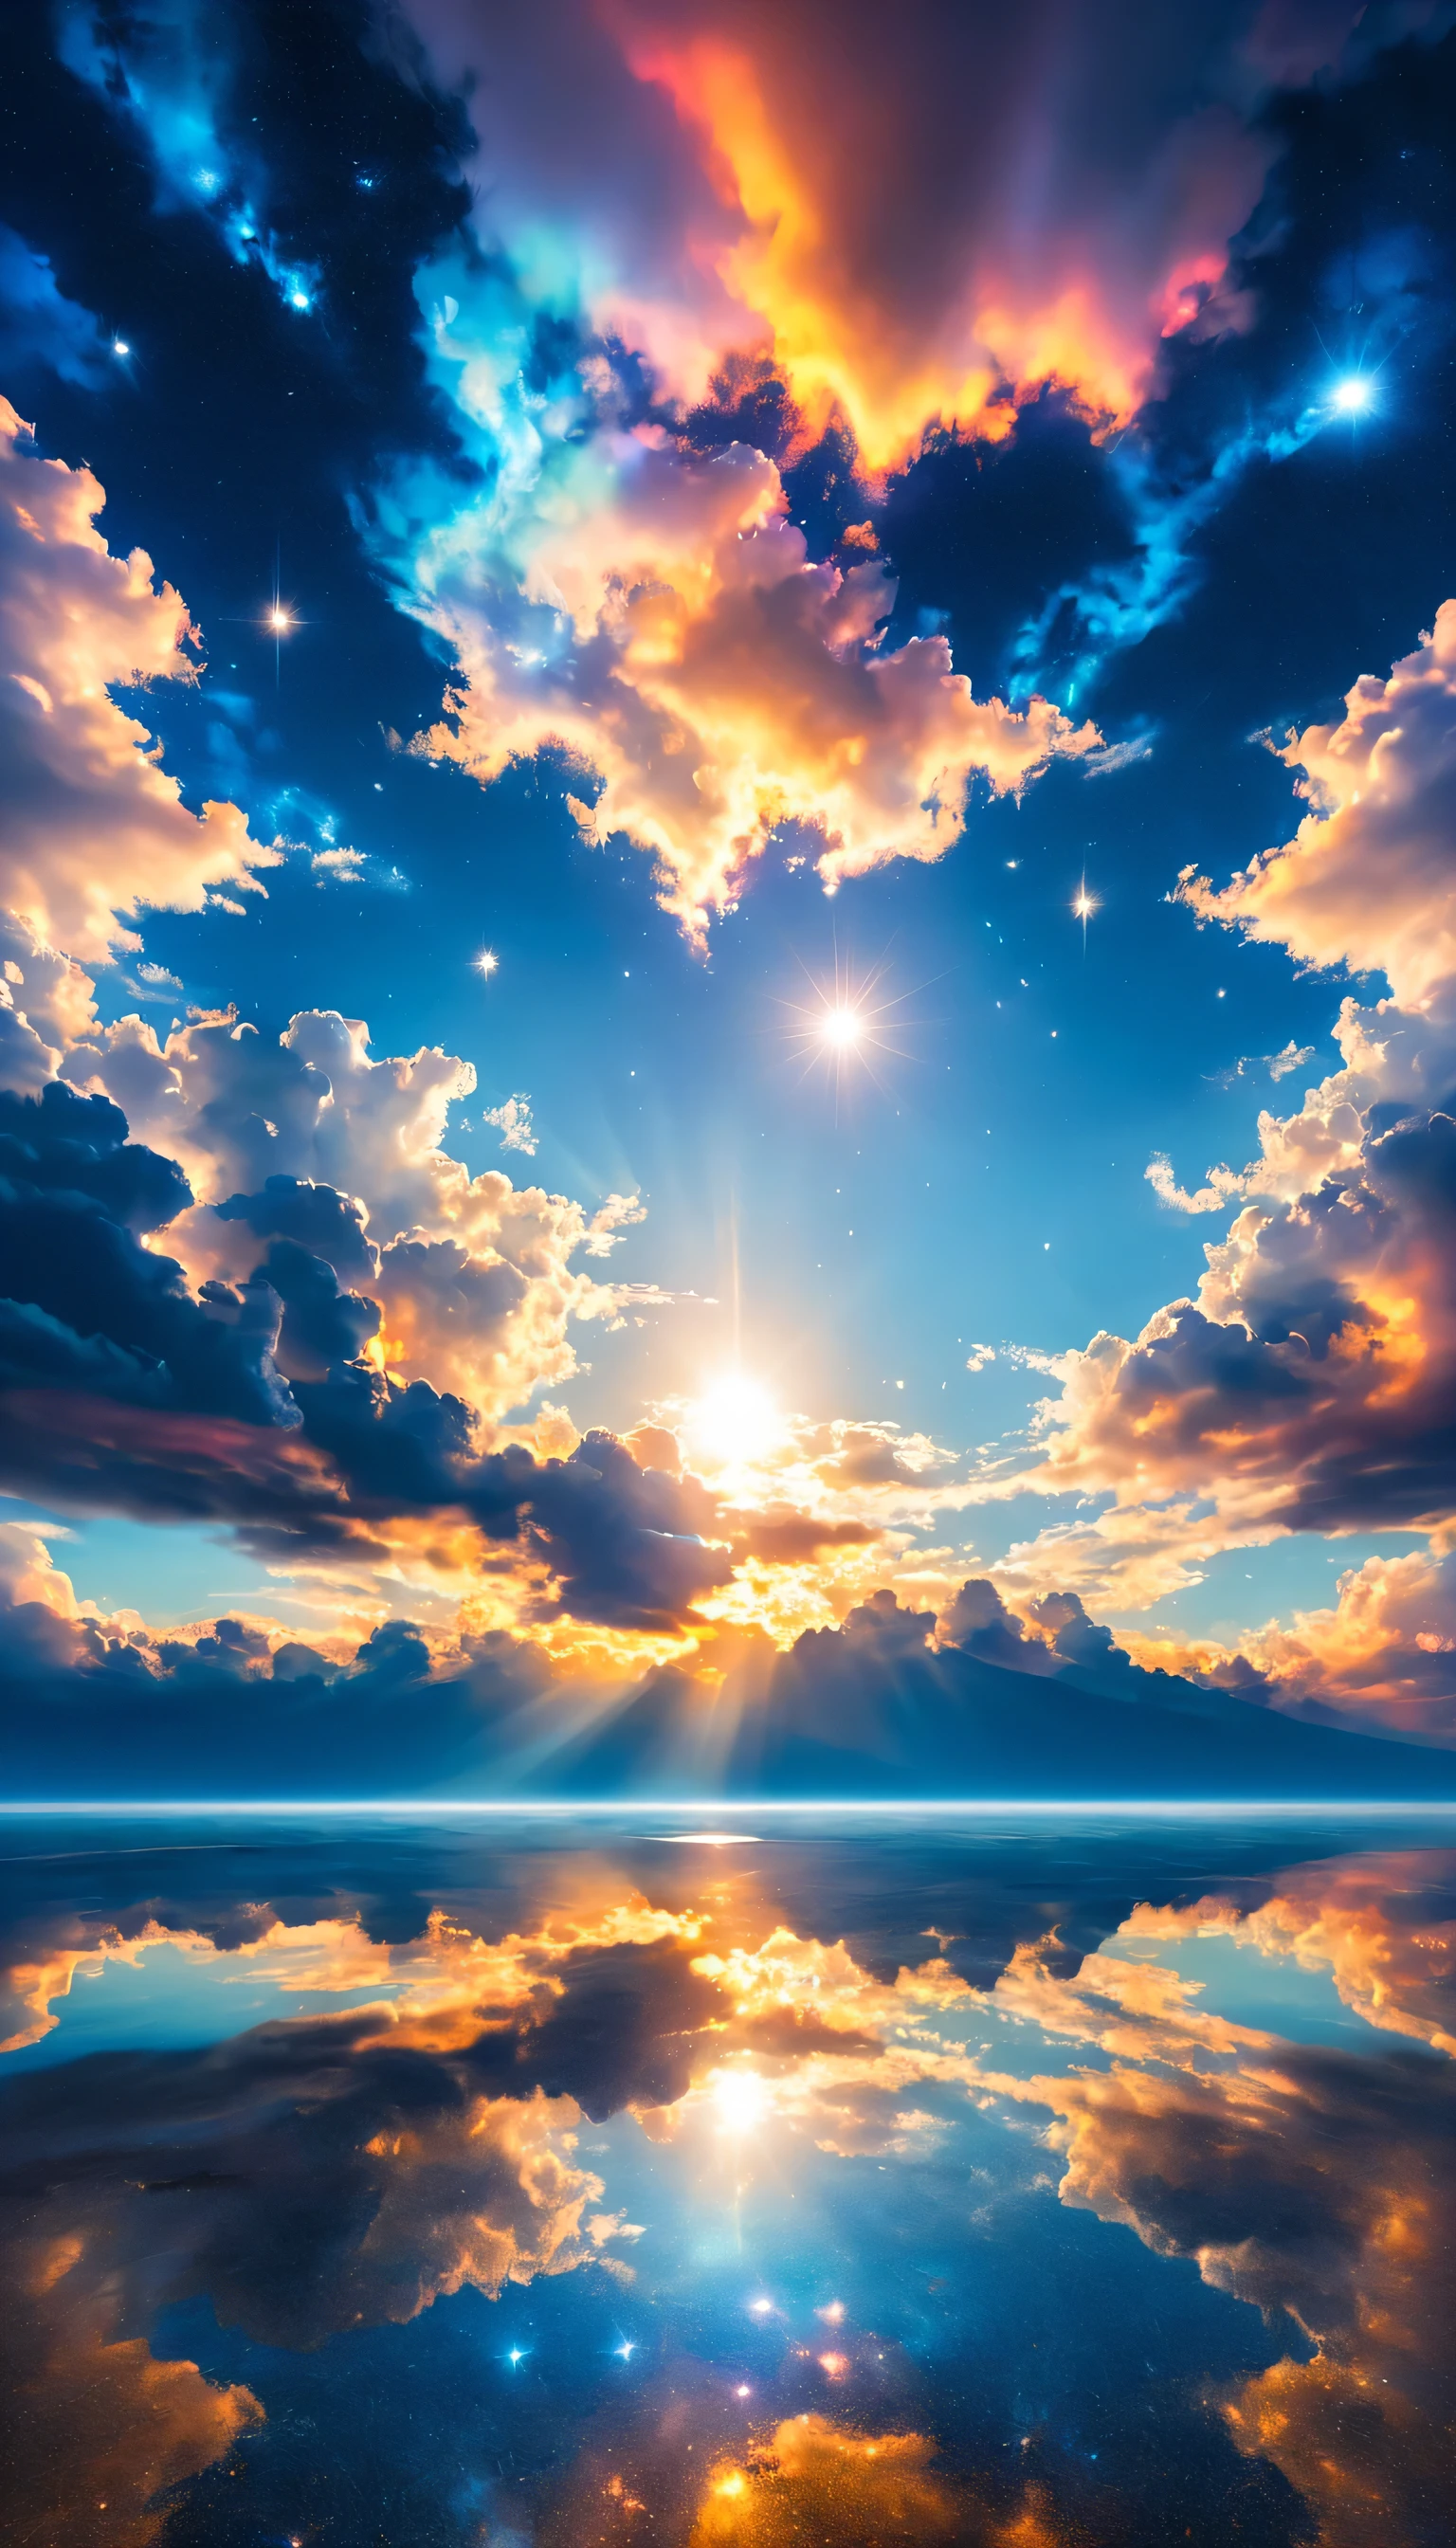 The sky is reflected in the mirrored sea,reflection,symmetry,Uyuni,moonlight,A beautiful sky spreads out,dream-like,,cloud,,Marine blue,wonderful景色が広がります,,Highestの時間をあなたに,Highest品質,photograph,structurally correct,perfect composition,広告用に撮影されたphotograph,beautiful light and shadow,Photographed by a professional photographer,Highestの景色に選ばれた,rich colors,Cast colorful spells,become familiar with,wonderful,wonderful,light effect,Sparkling,reflection,night,night空,star,Highest